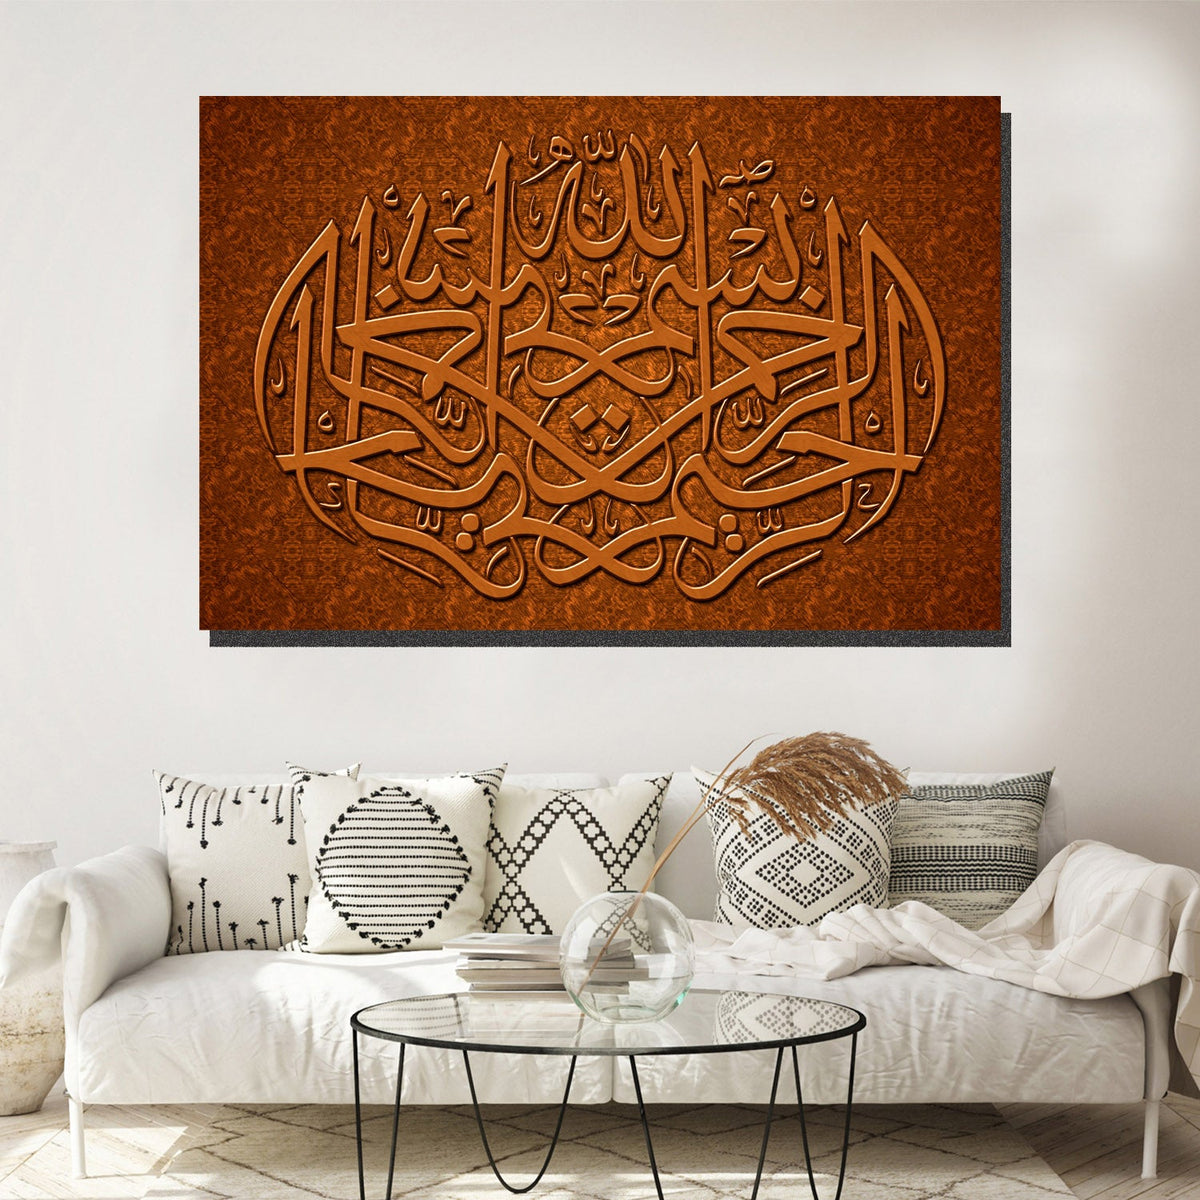 https://cdn.shopify.com/s/files/1/0387/9986/8044/products/BismallahArabicCalligraphyCanvasArtprintStretched-3.jpg